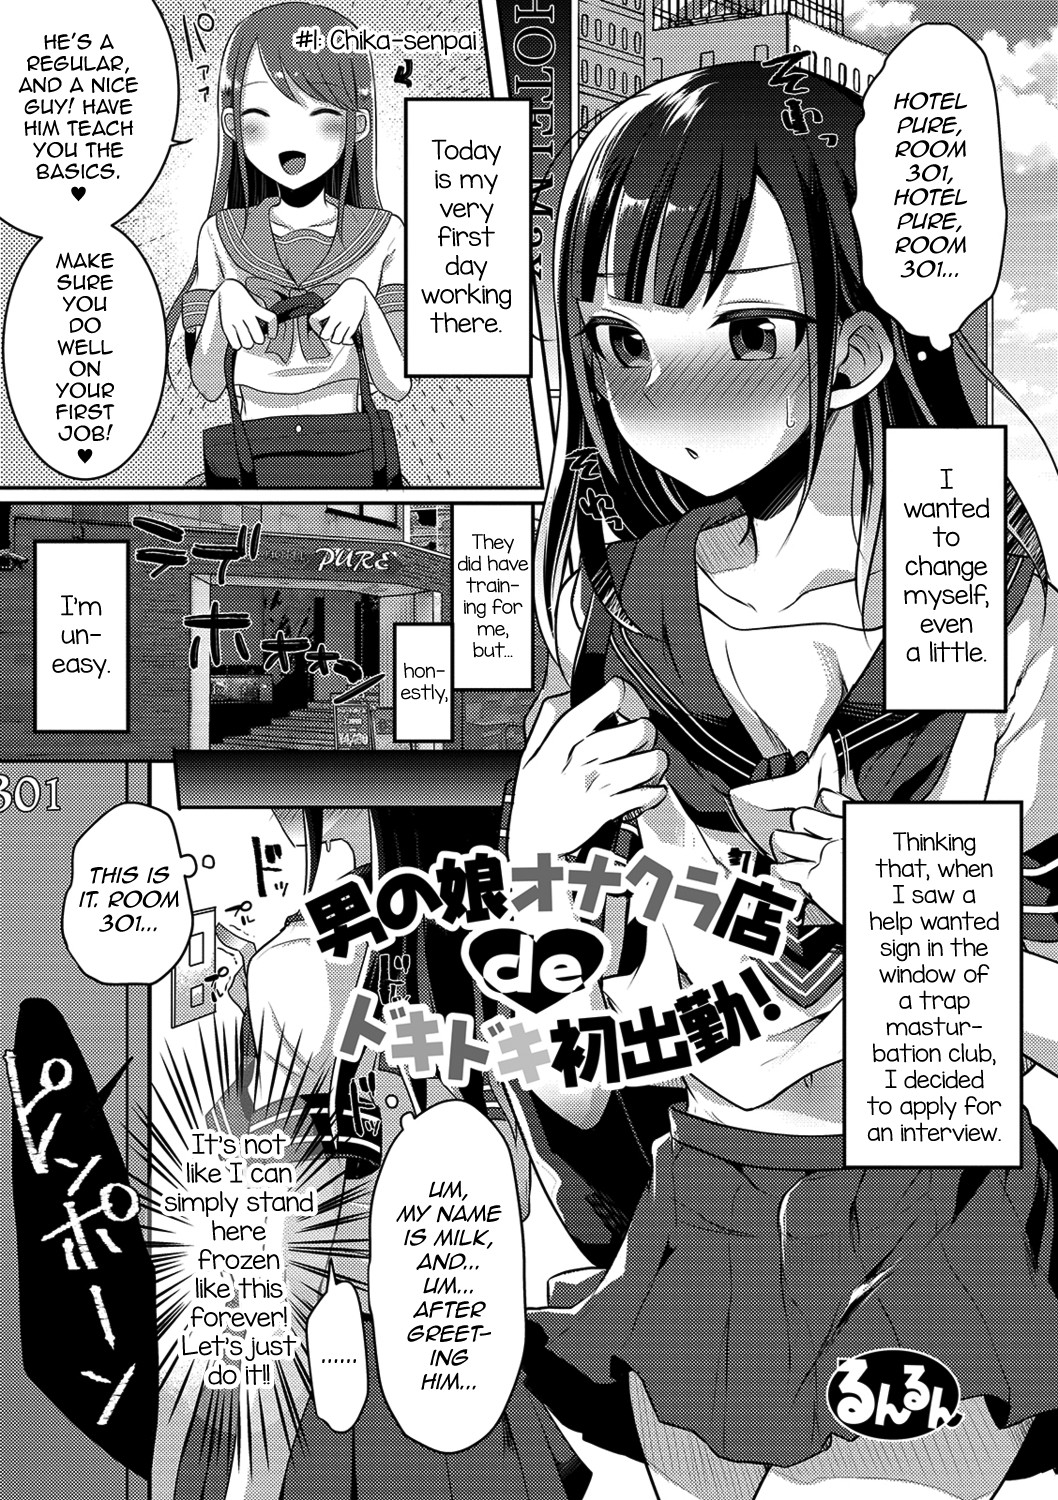 Read - A Trap's Exciting First Time At The School Store - Hentai Magazine  Chapters